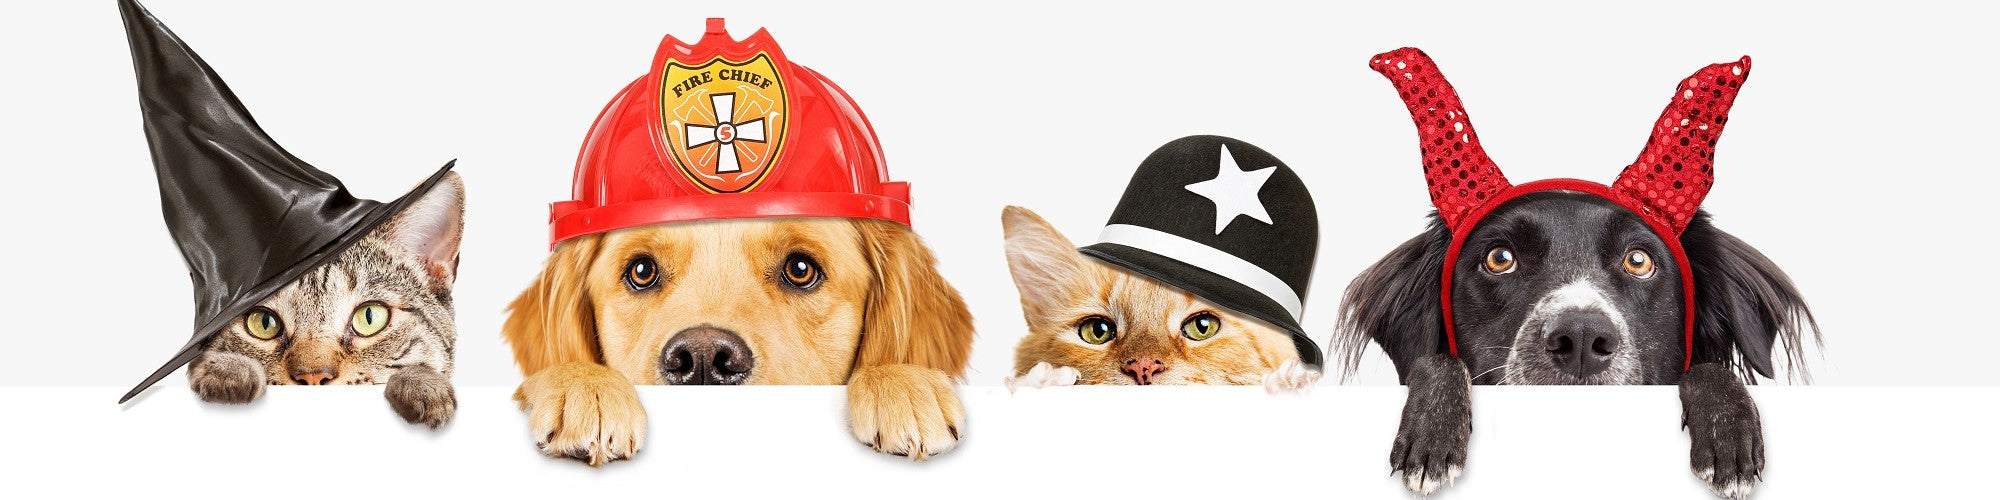 The Role of Pets in Halloween: Safety Tips and Cute Costume Ideas